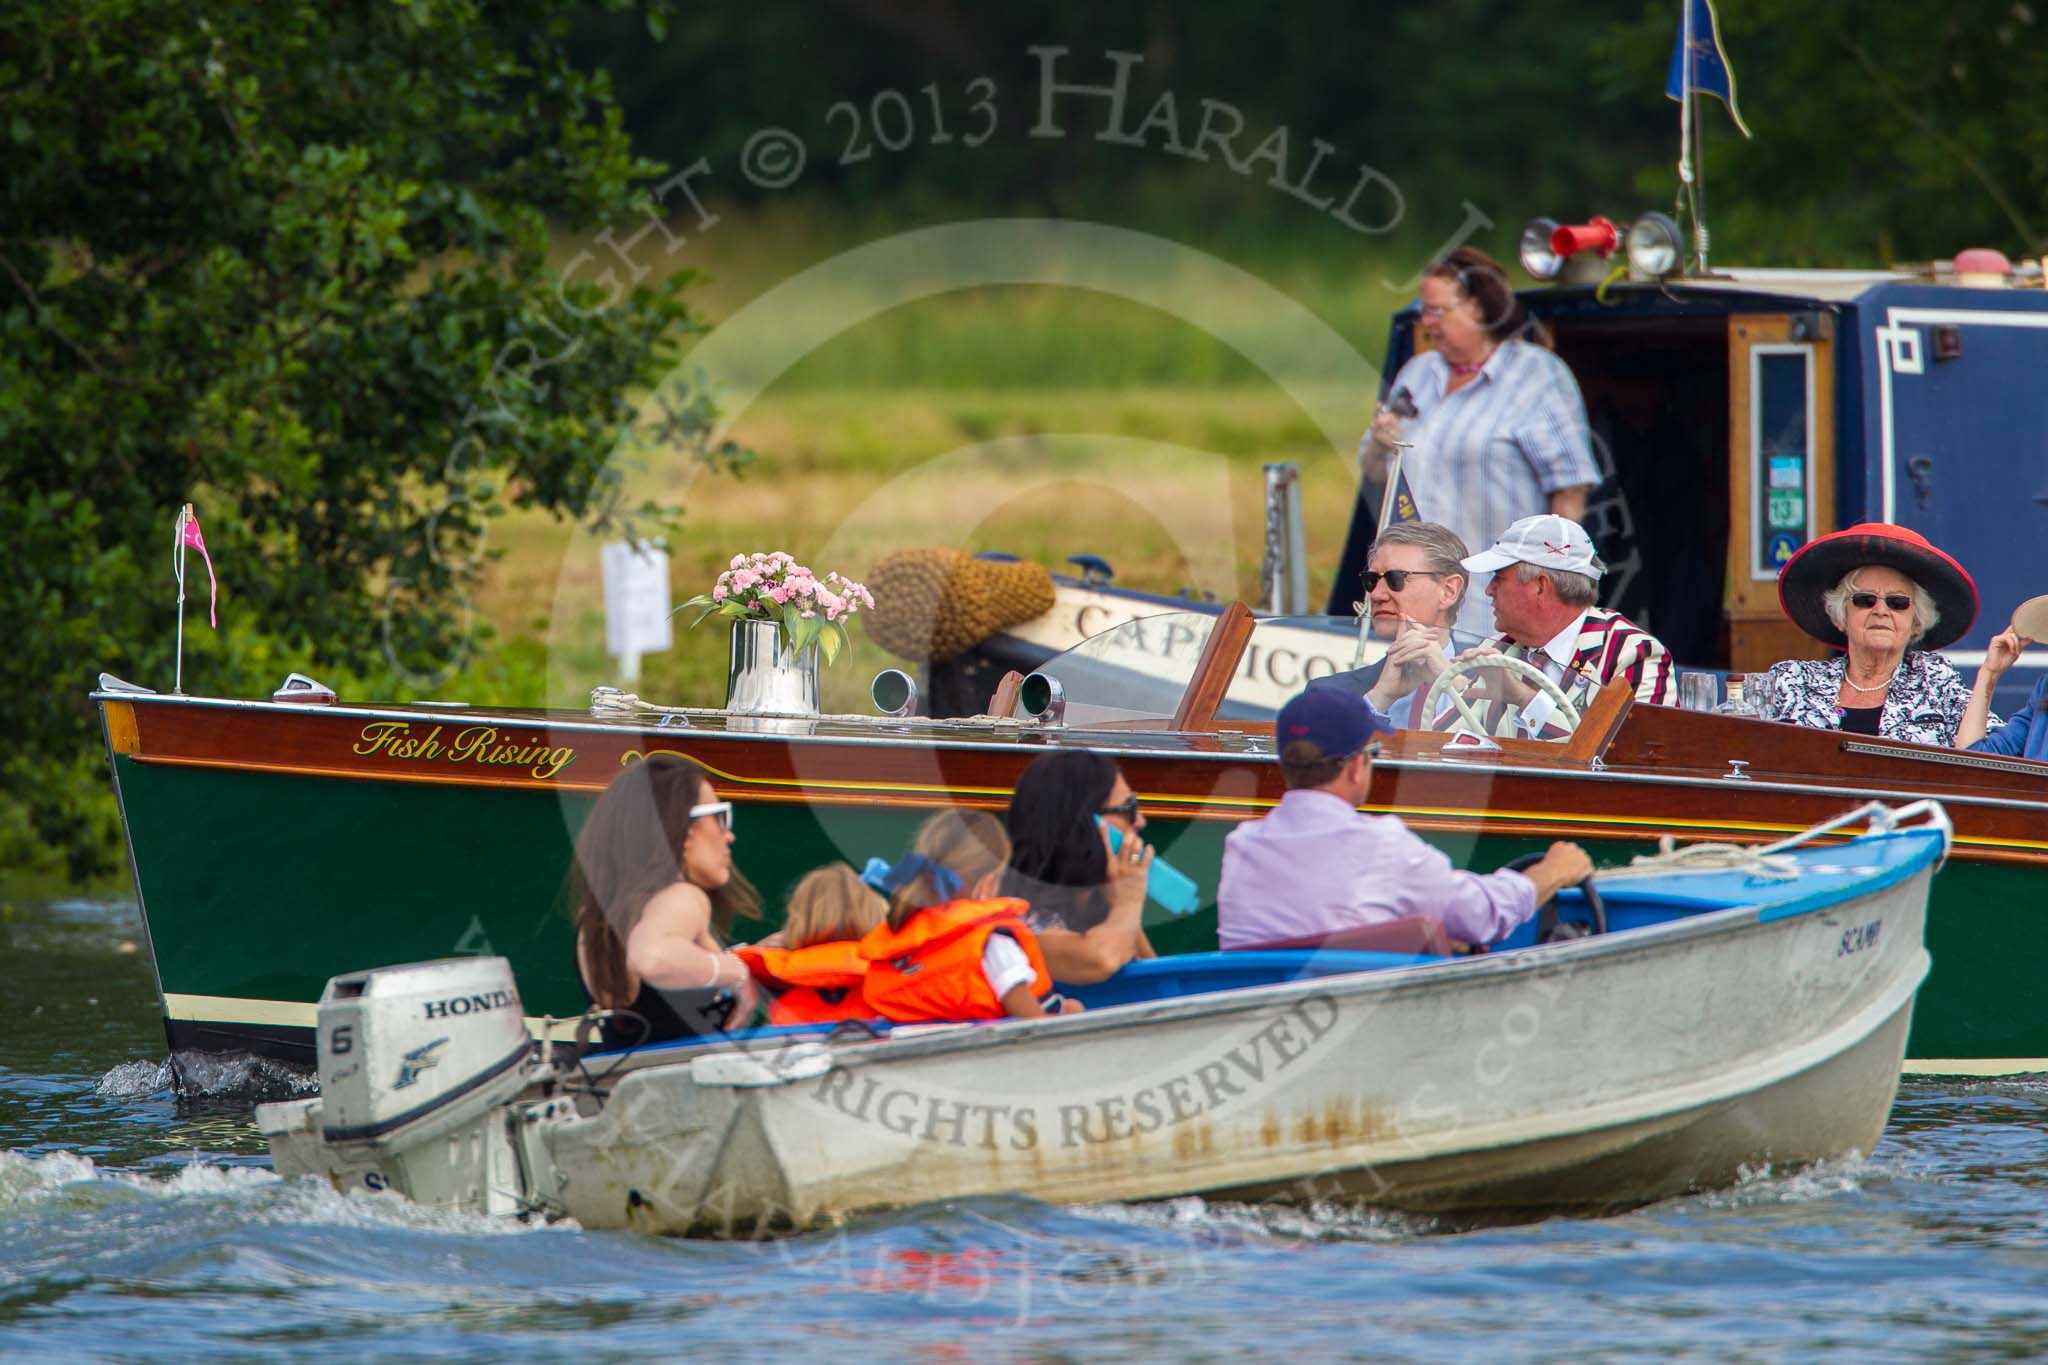 Henley Royal Regatta 2013, Saturday: Three lanes of traffic on the Thames next to the race course. Image #187, 06 July 2013 11:12 River Thames, Henley on Thames, UK